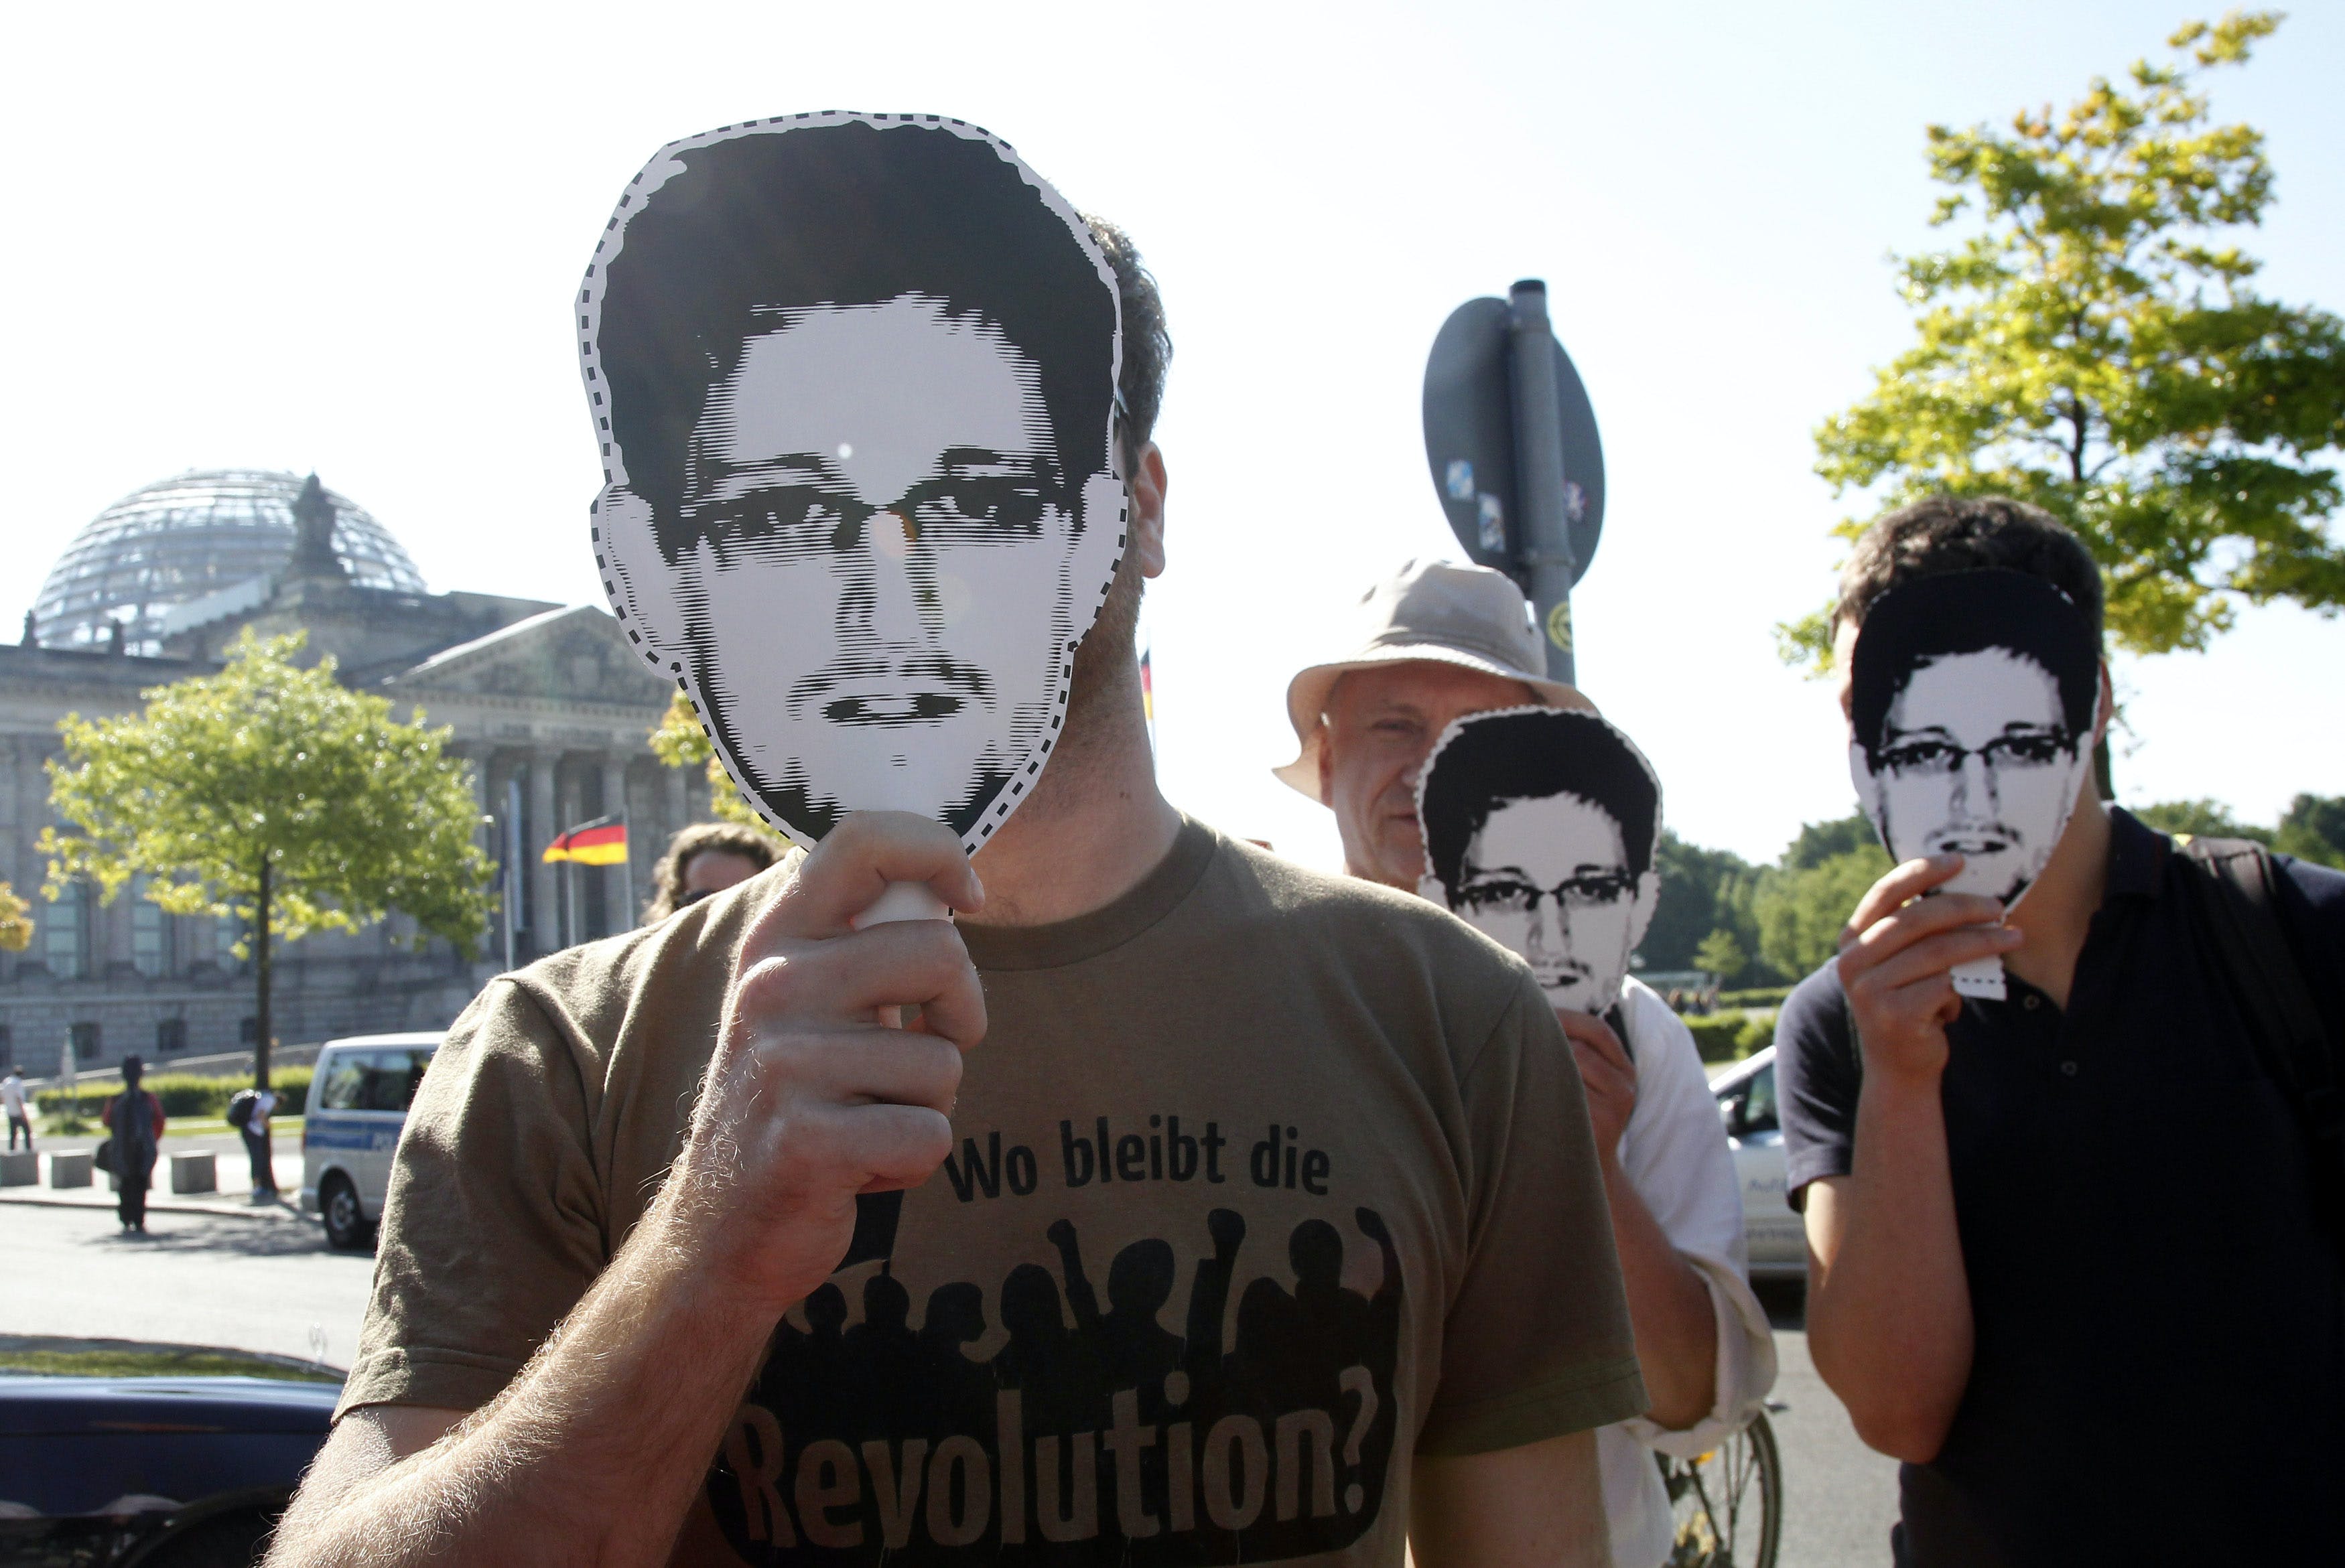 Protesters hold masks depicting former U.S. National Security Agency contractor Edward Snowden during a demonstration in Berlin